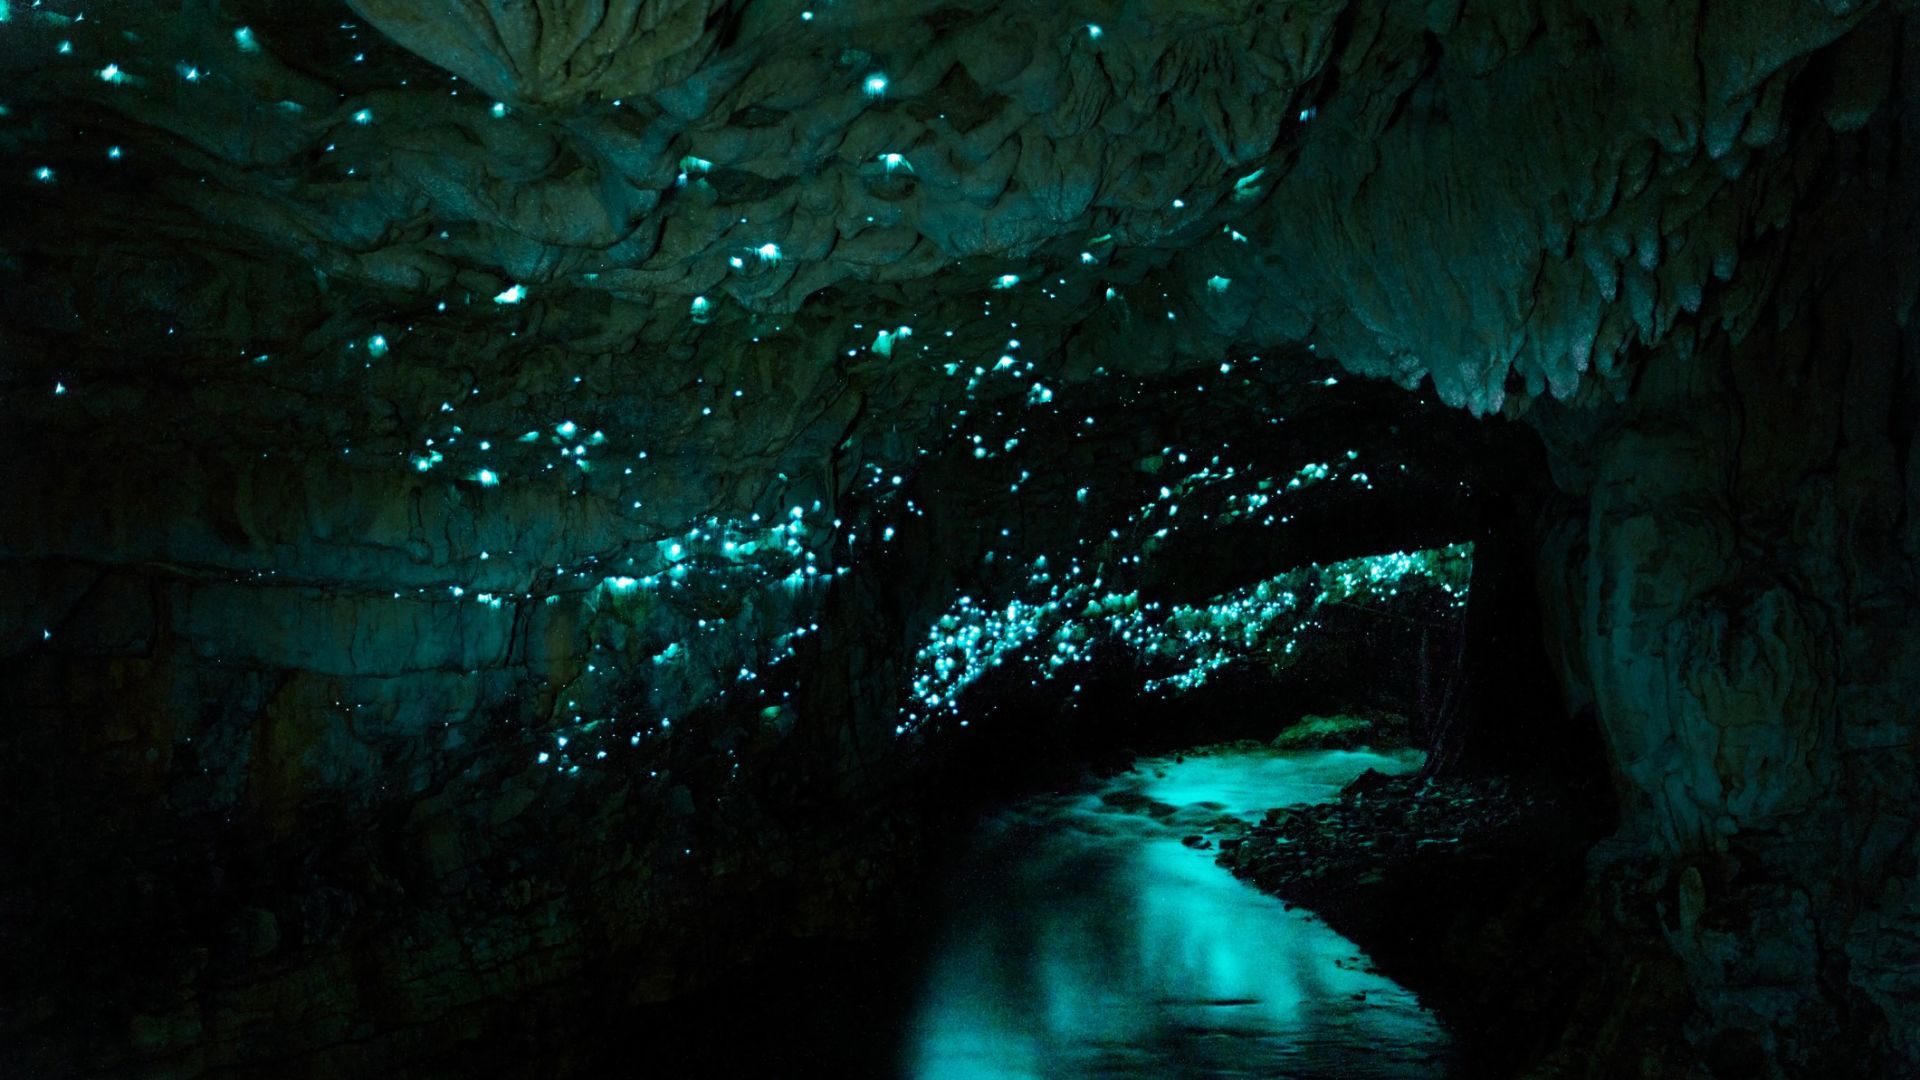 <p>                     If you fancy swapping a night under the stars for a different kind of light show, New Zealand's famous glowworm caves may be just the ticket.                    </p>                                      <p>                     According to NewZealand.com, the Waitomo Caves offer some of the best glowworm sights in the country. Take a trip through the Waitomo Caves either by boat, kayak or on foot and gaze up at the thousands of glowworms that call these caves home. The unique environment looks like something straight out of a sci-fi movie, with strange creatures illuminating the way like a star-studded sky.                    </p>                                      <p>                     Glowworms produce light via a chemical reaction, in a process known as bioluminescence, according to the Natural History Museum in London.                   </p>